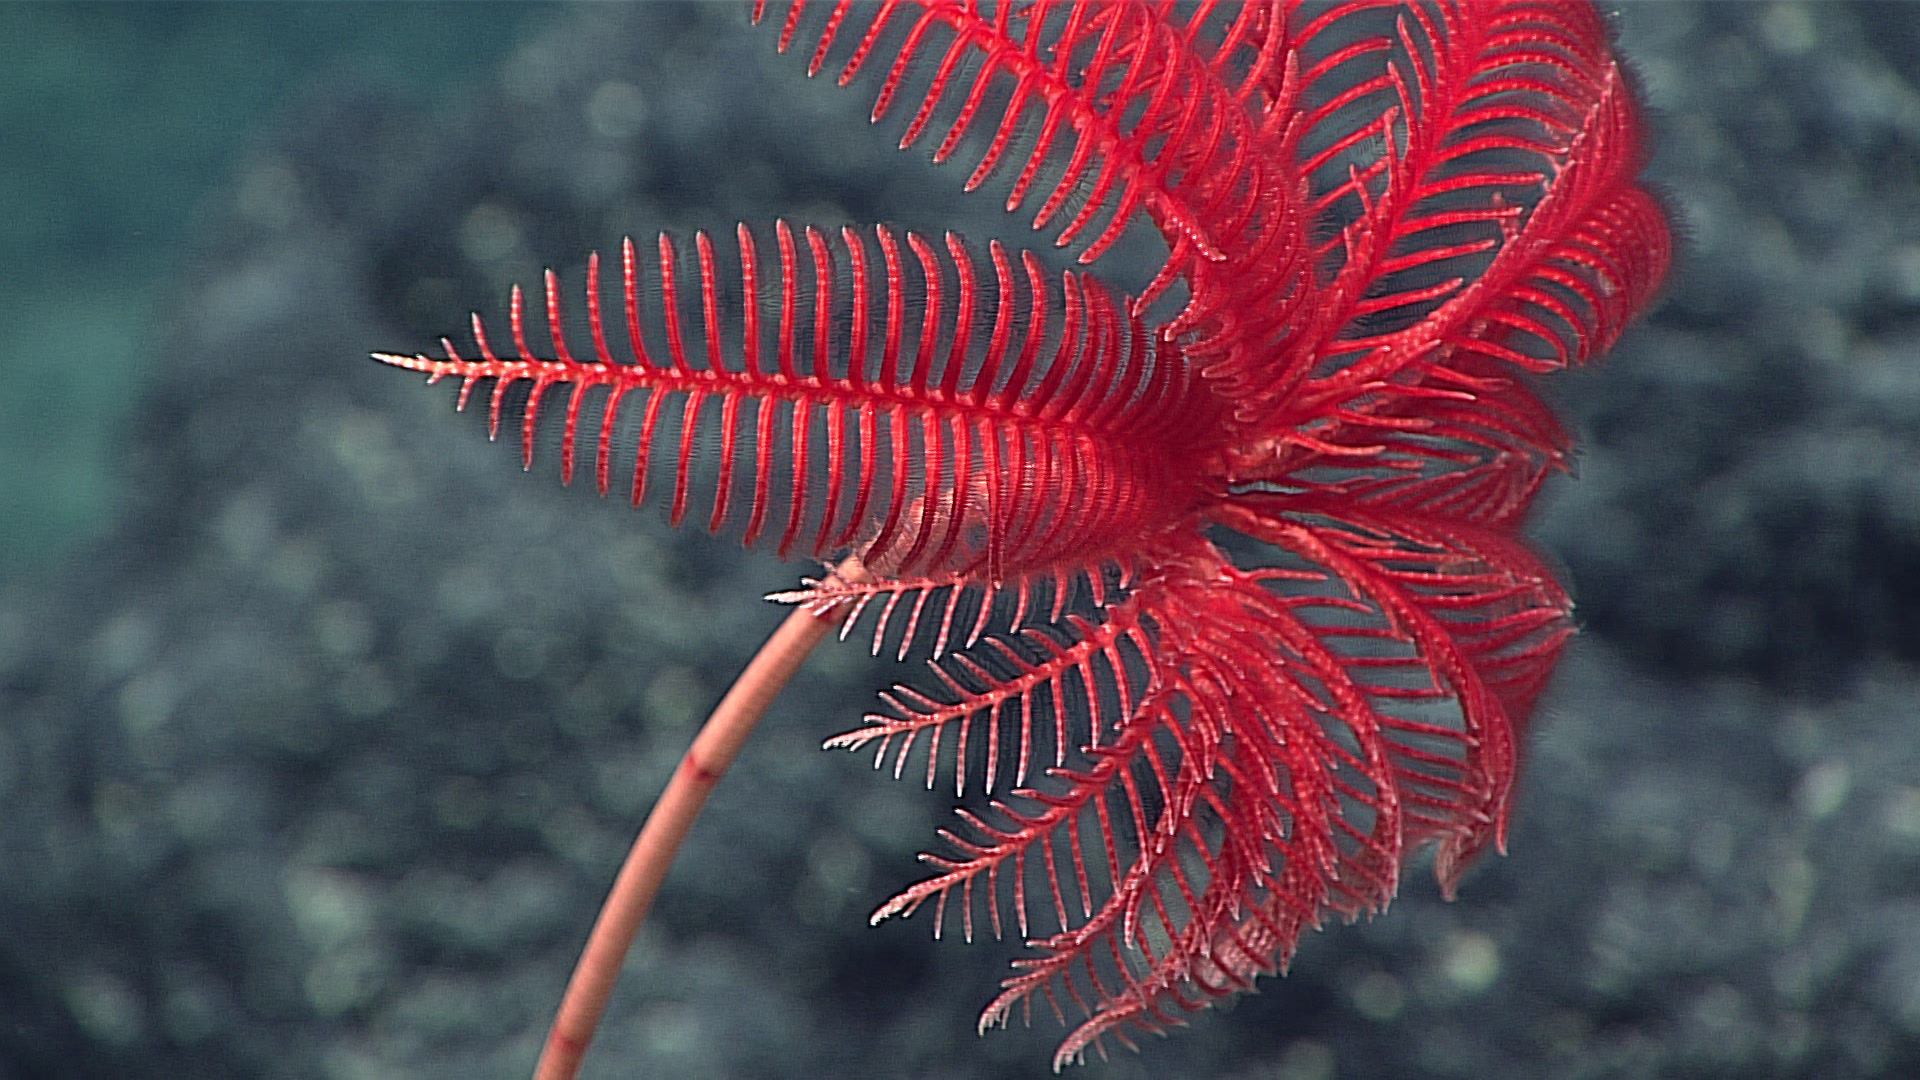 Stalked crinoid, 2016 Deepwater Exploration of the Marianas.